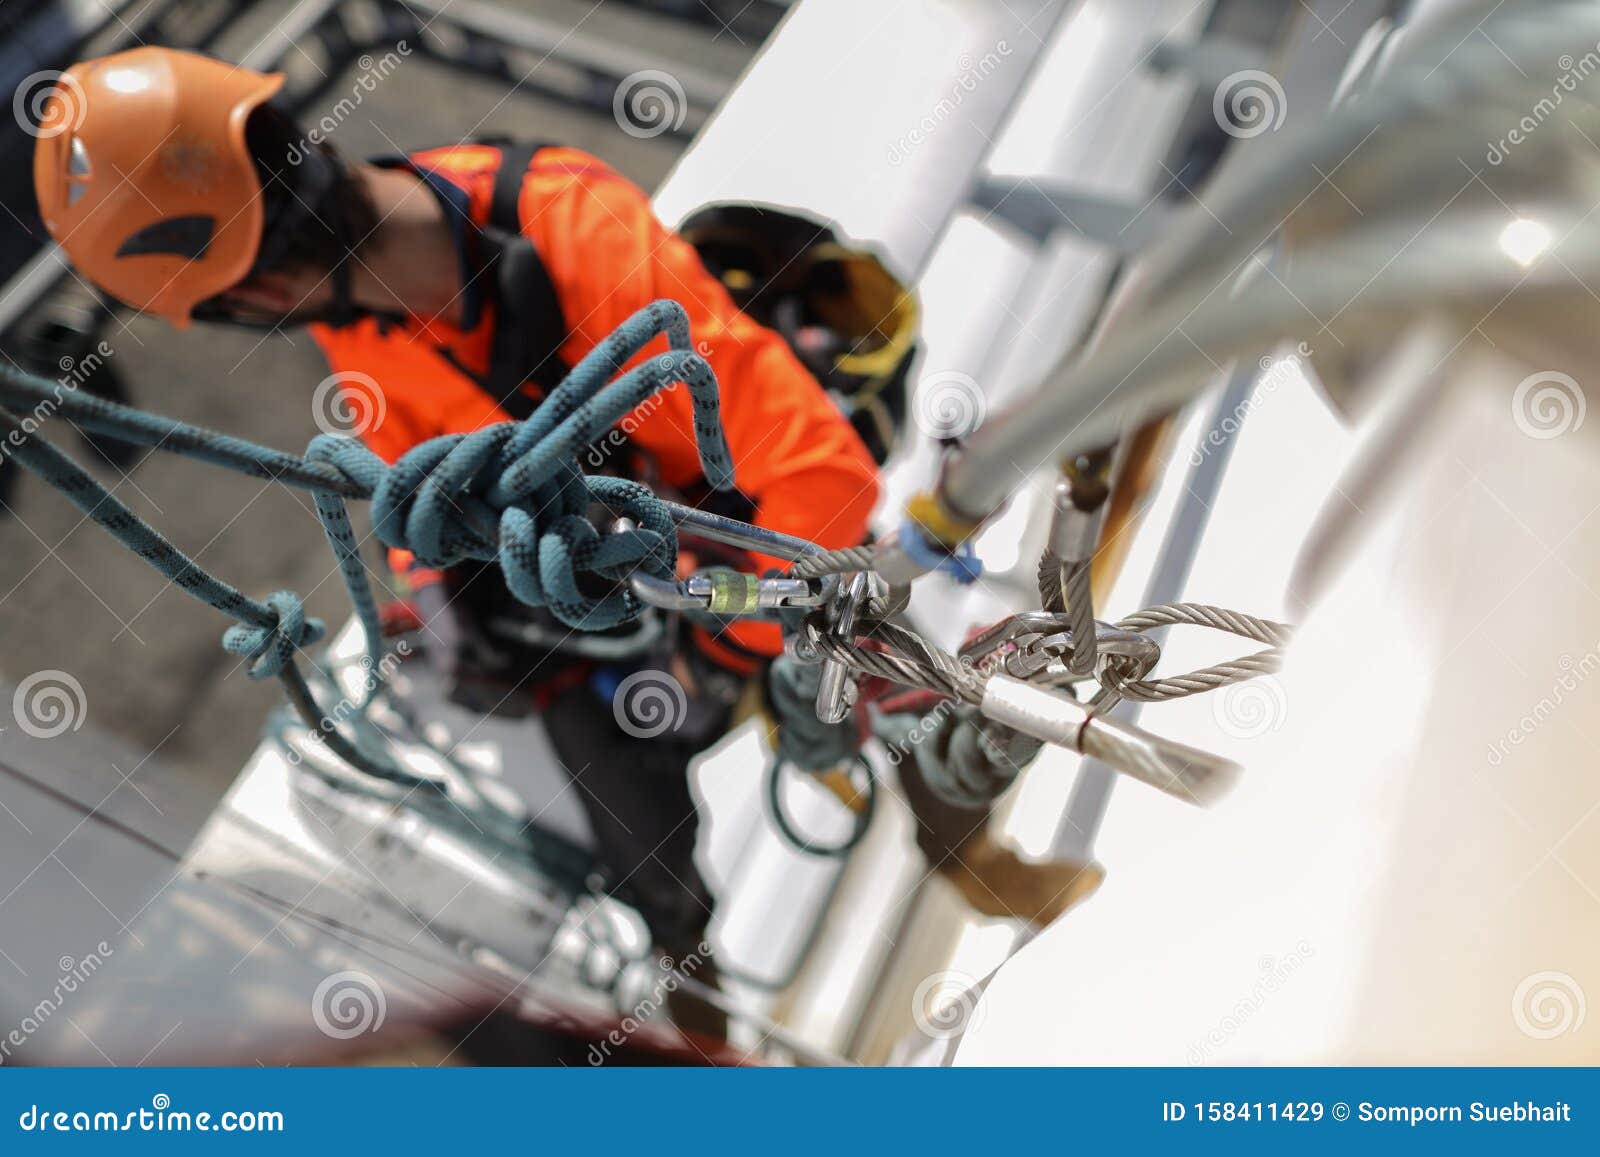 Rope Access Worker Rigged Anchor Point with Wire Rope Slings Standard 6x36  IWRC B with Thimble or Soft Eyes Stock Image - Image of closeup, belay:  158411429